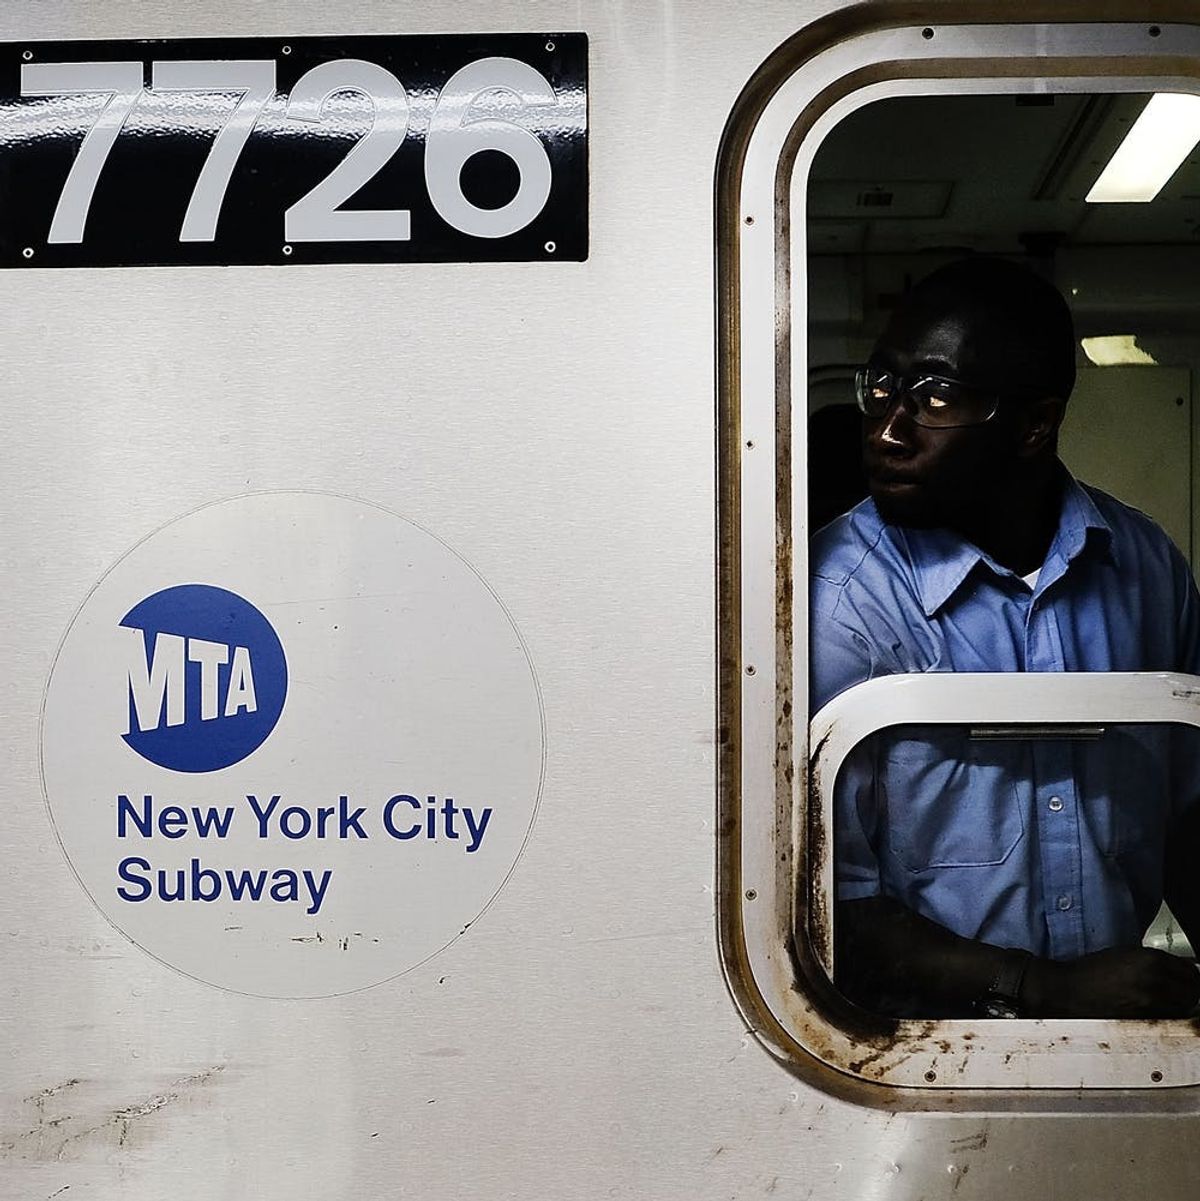 The NYC Subway System Is Moving to Gender-Neutral Language During Announcements